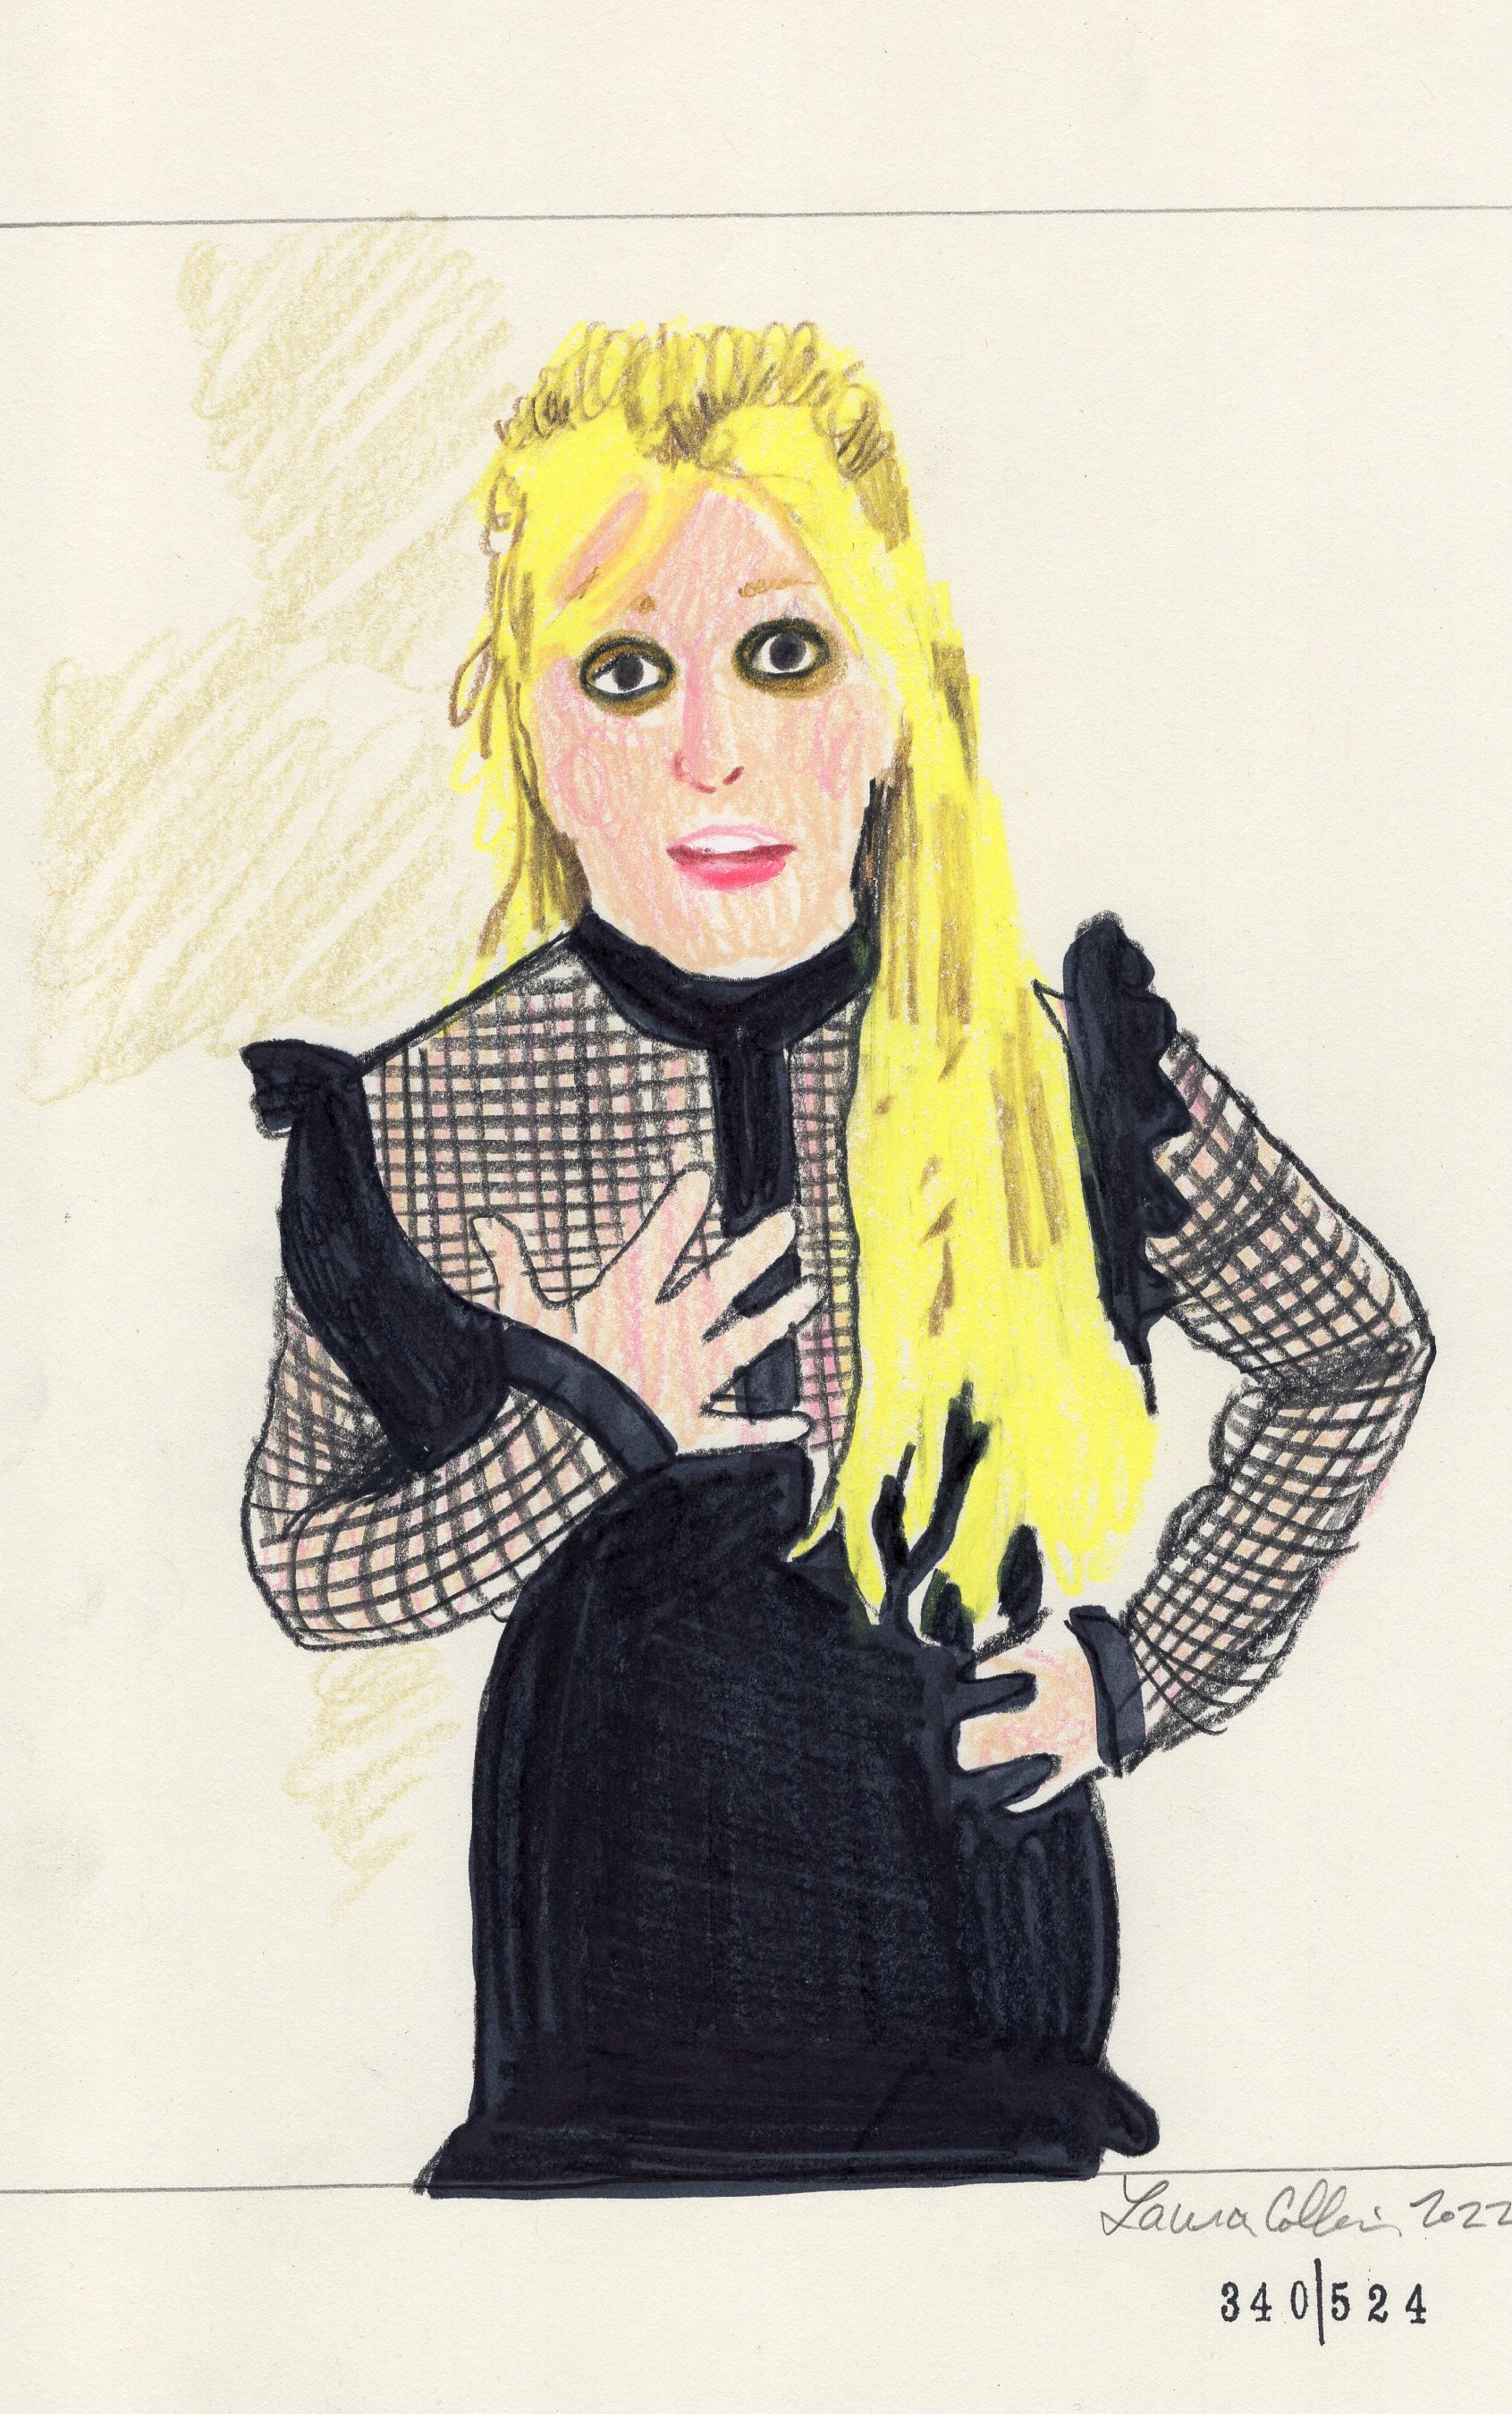 Laura Collins Britney Spears Animation 6x9in mixed media 2022 no340.jpg